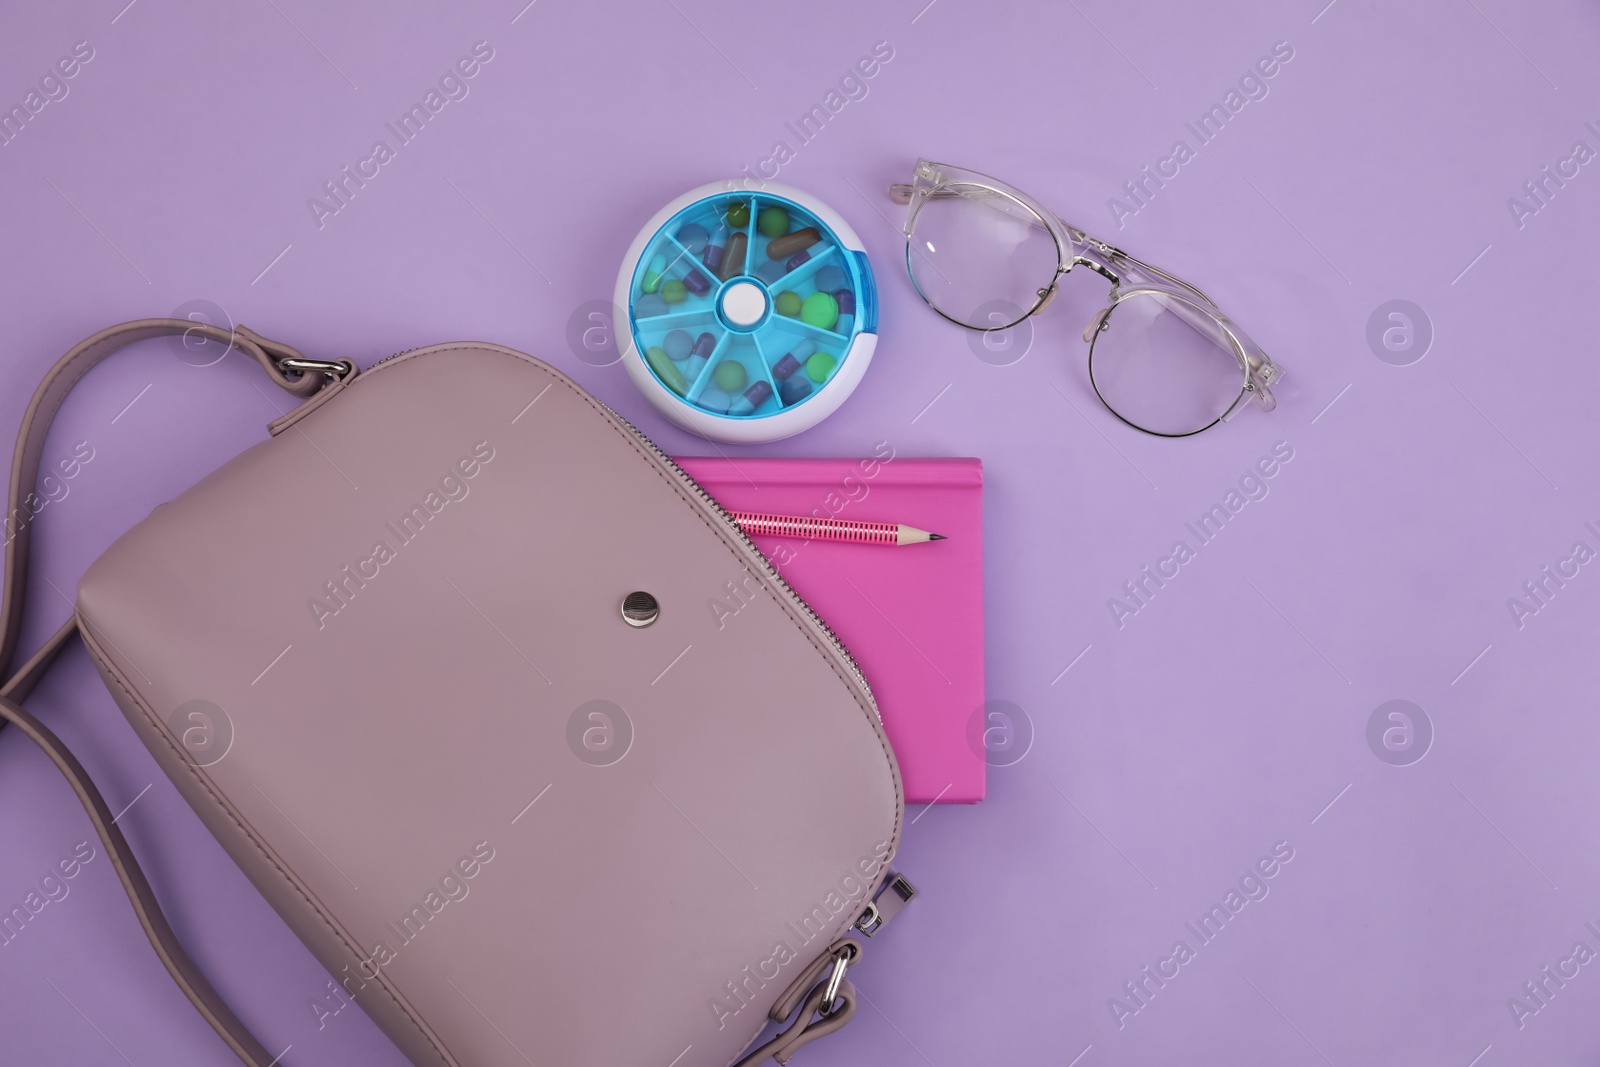 Photo of Stylish women's bag with plastic pill box, glasses and stationery on lilac background, flat lay